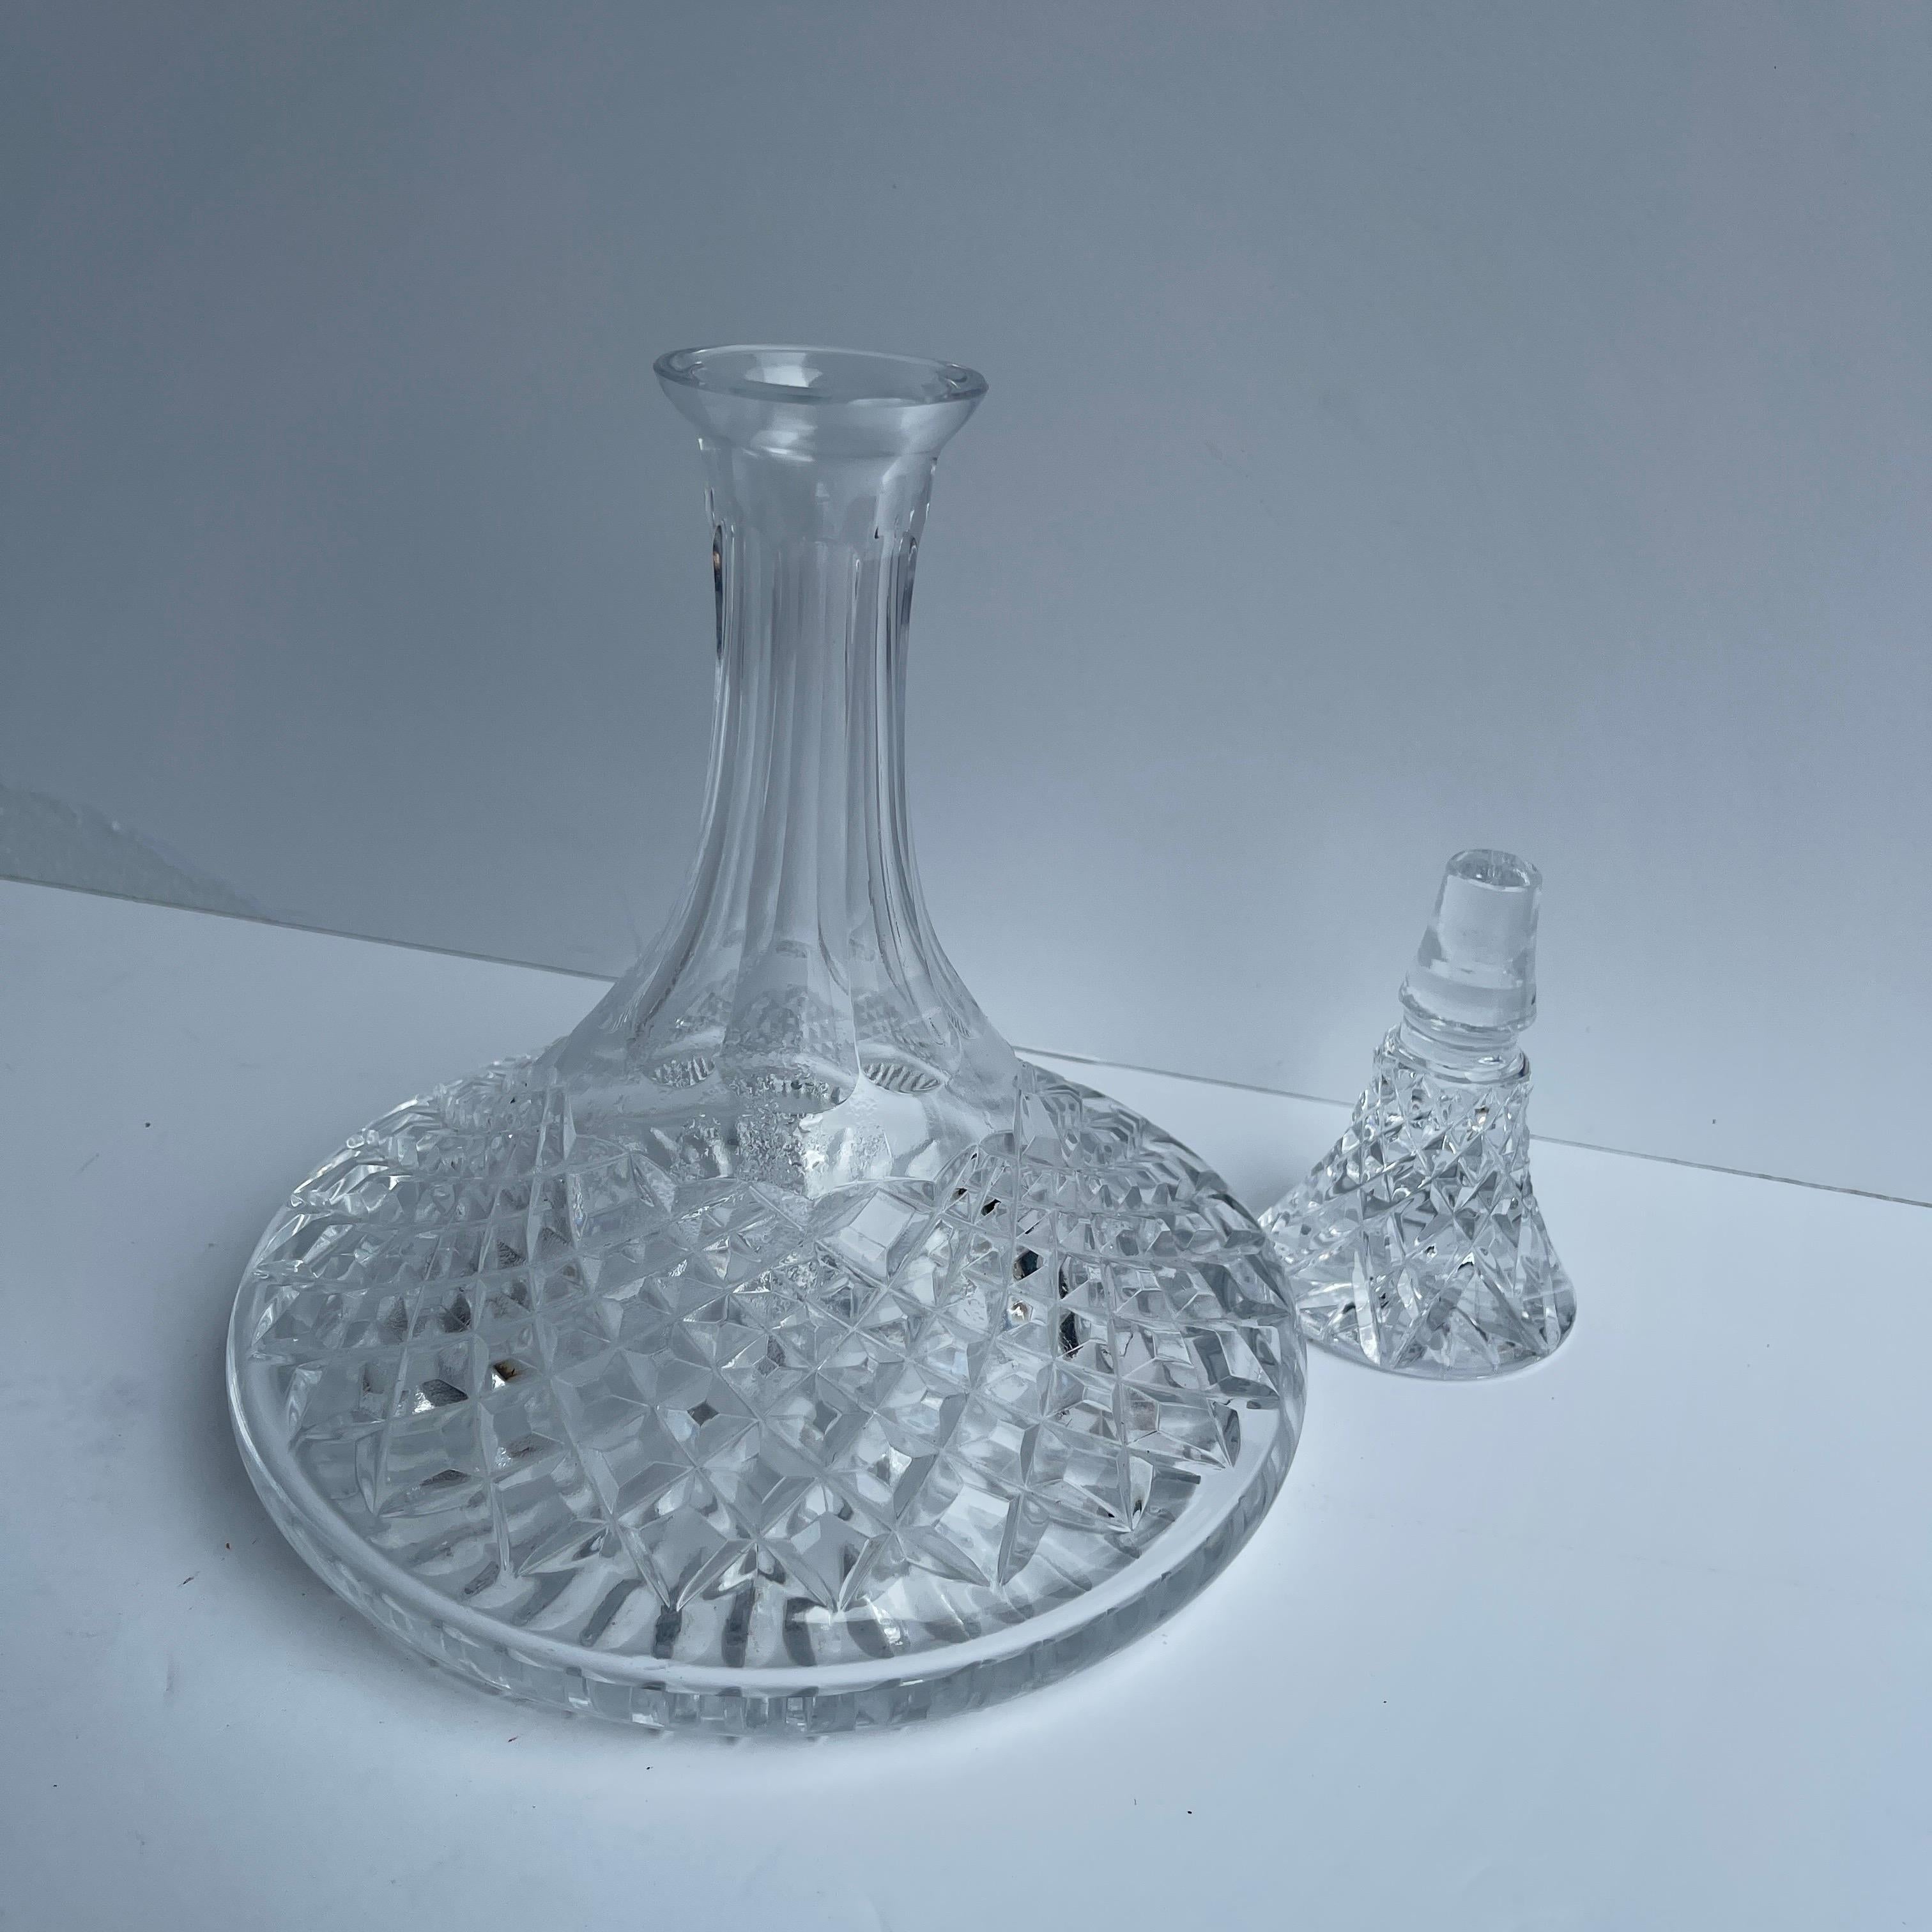 American Vintage Cut Glass Decanter, circa Early 1900's